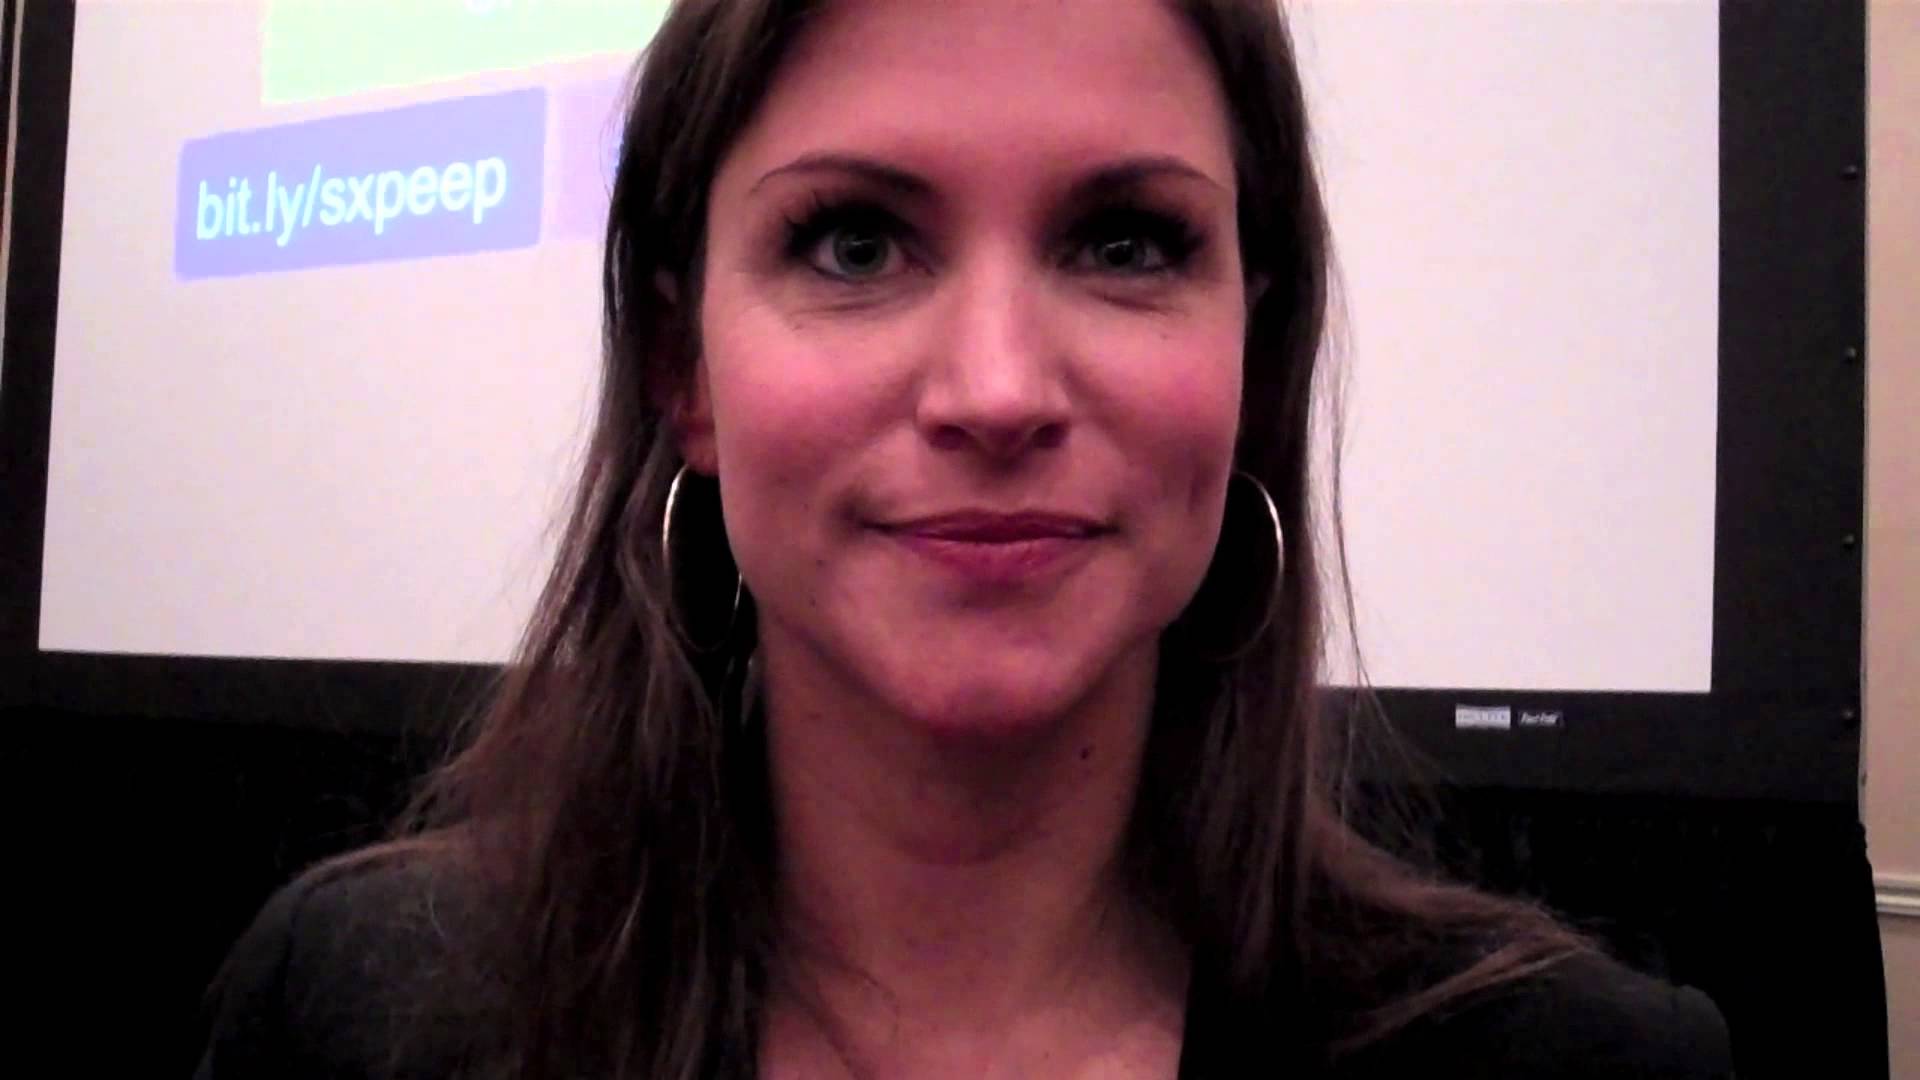 WWE and Social TV: Stephanie McMahon at SXSW 2013